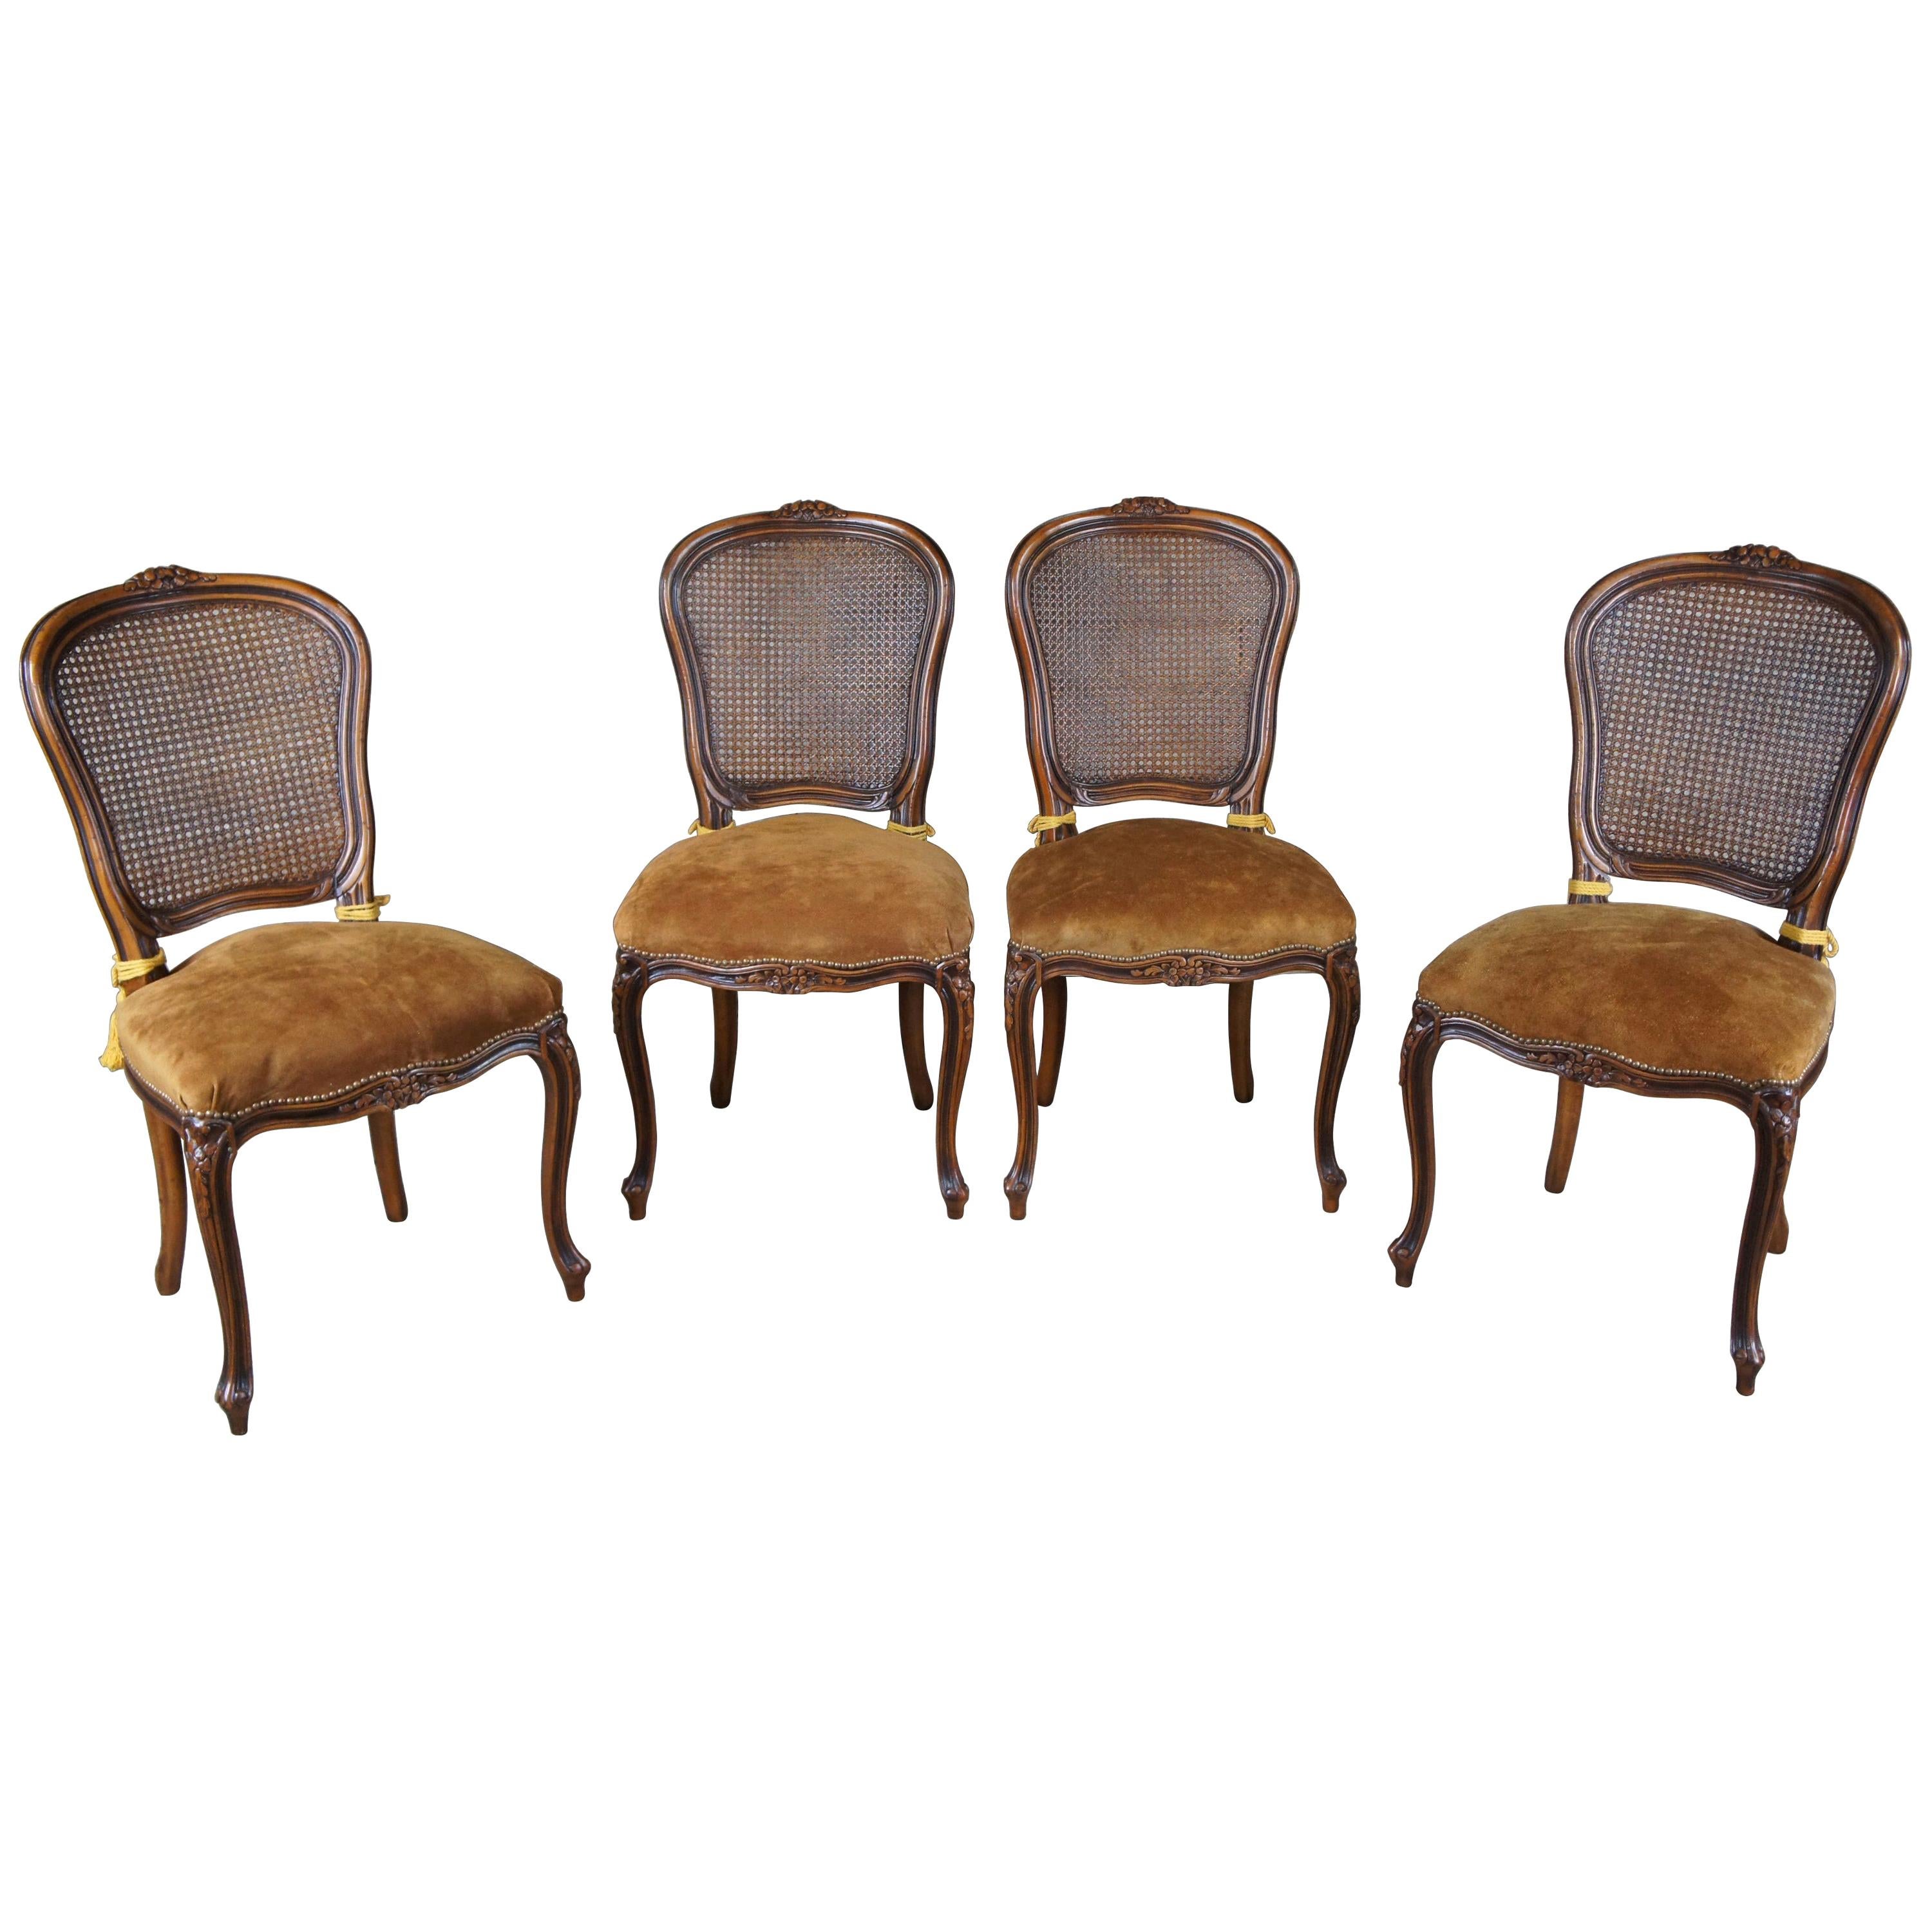 4 Chateau d'Ax French Louis XV Caned Suede Nailhead Side Dining Chairs Italian